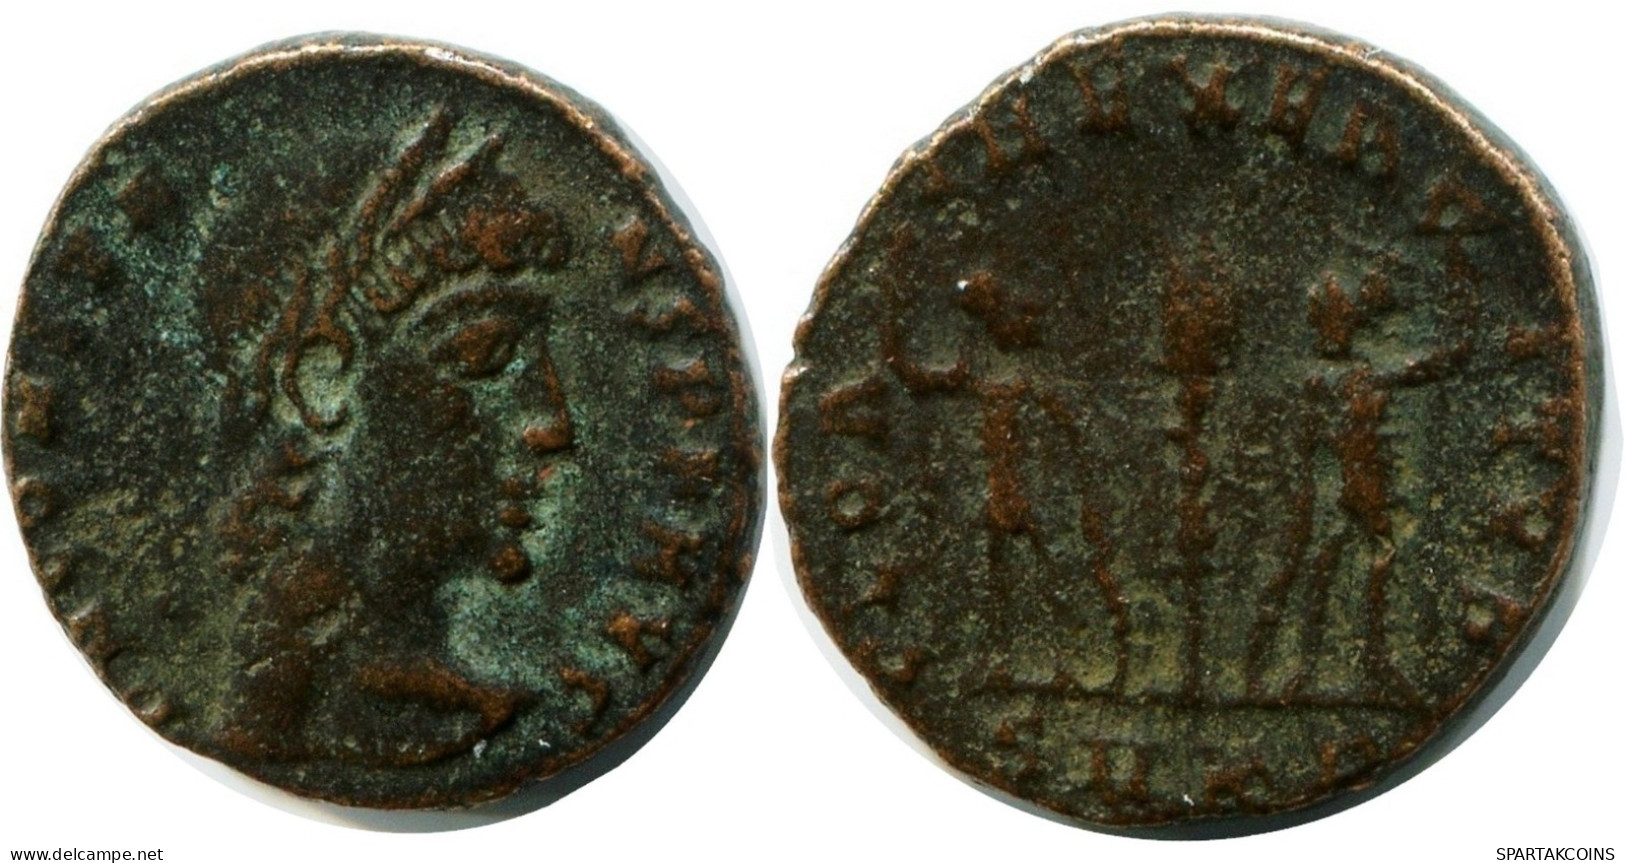 CONSTANS MINTED IN CYZICUS FROM THE ROYAL ONTARIO MUSEUM #ANC11650.14.D.A - The Christian Empire (307 AD Tot 363 AD)